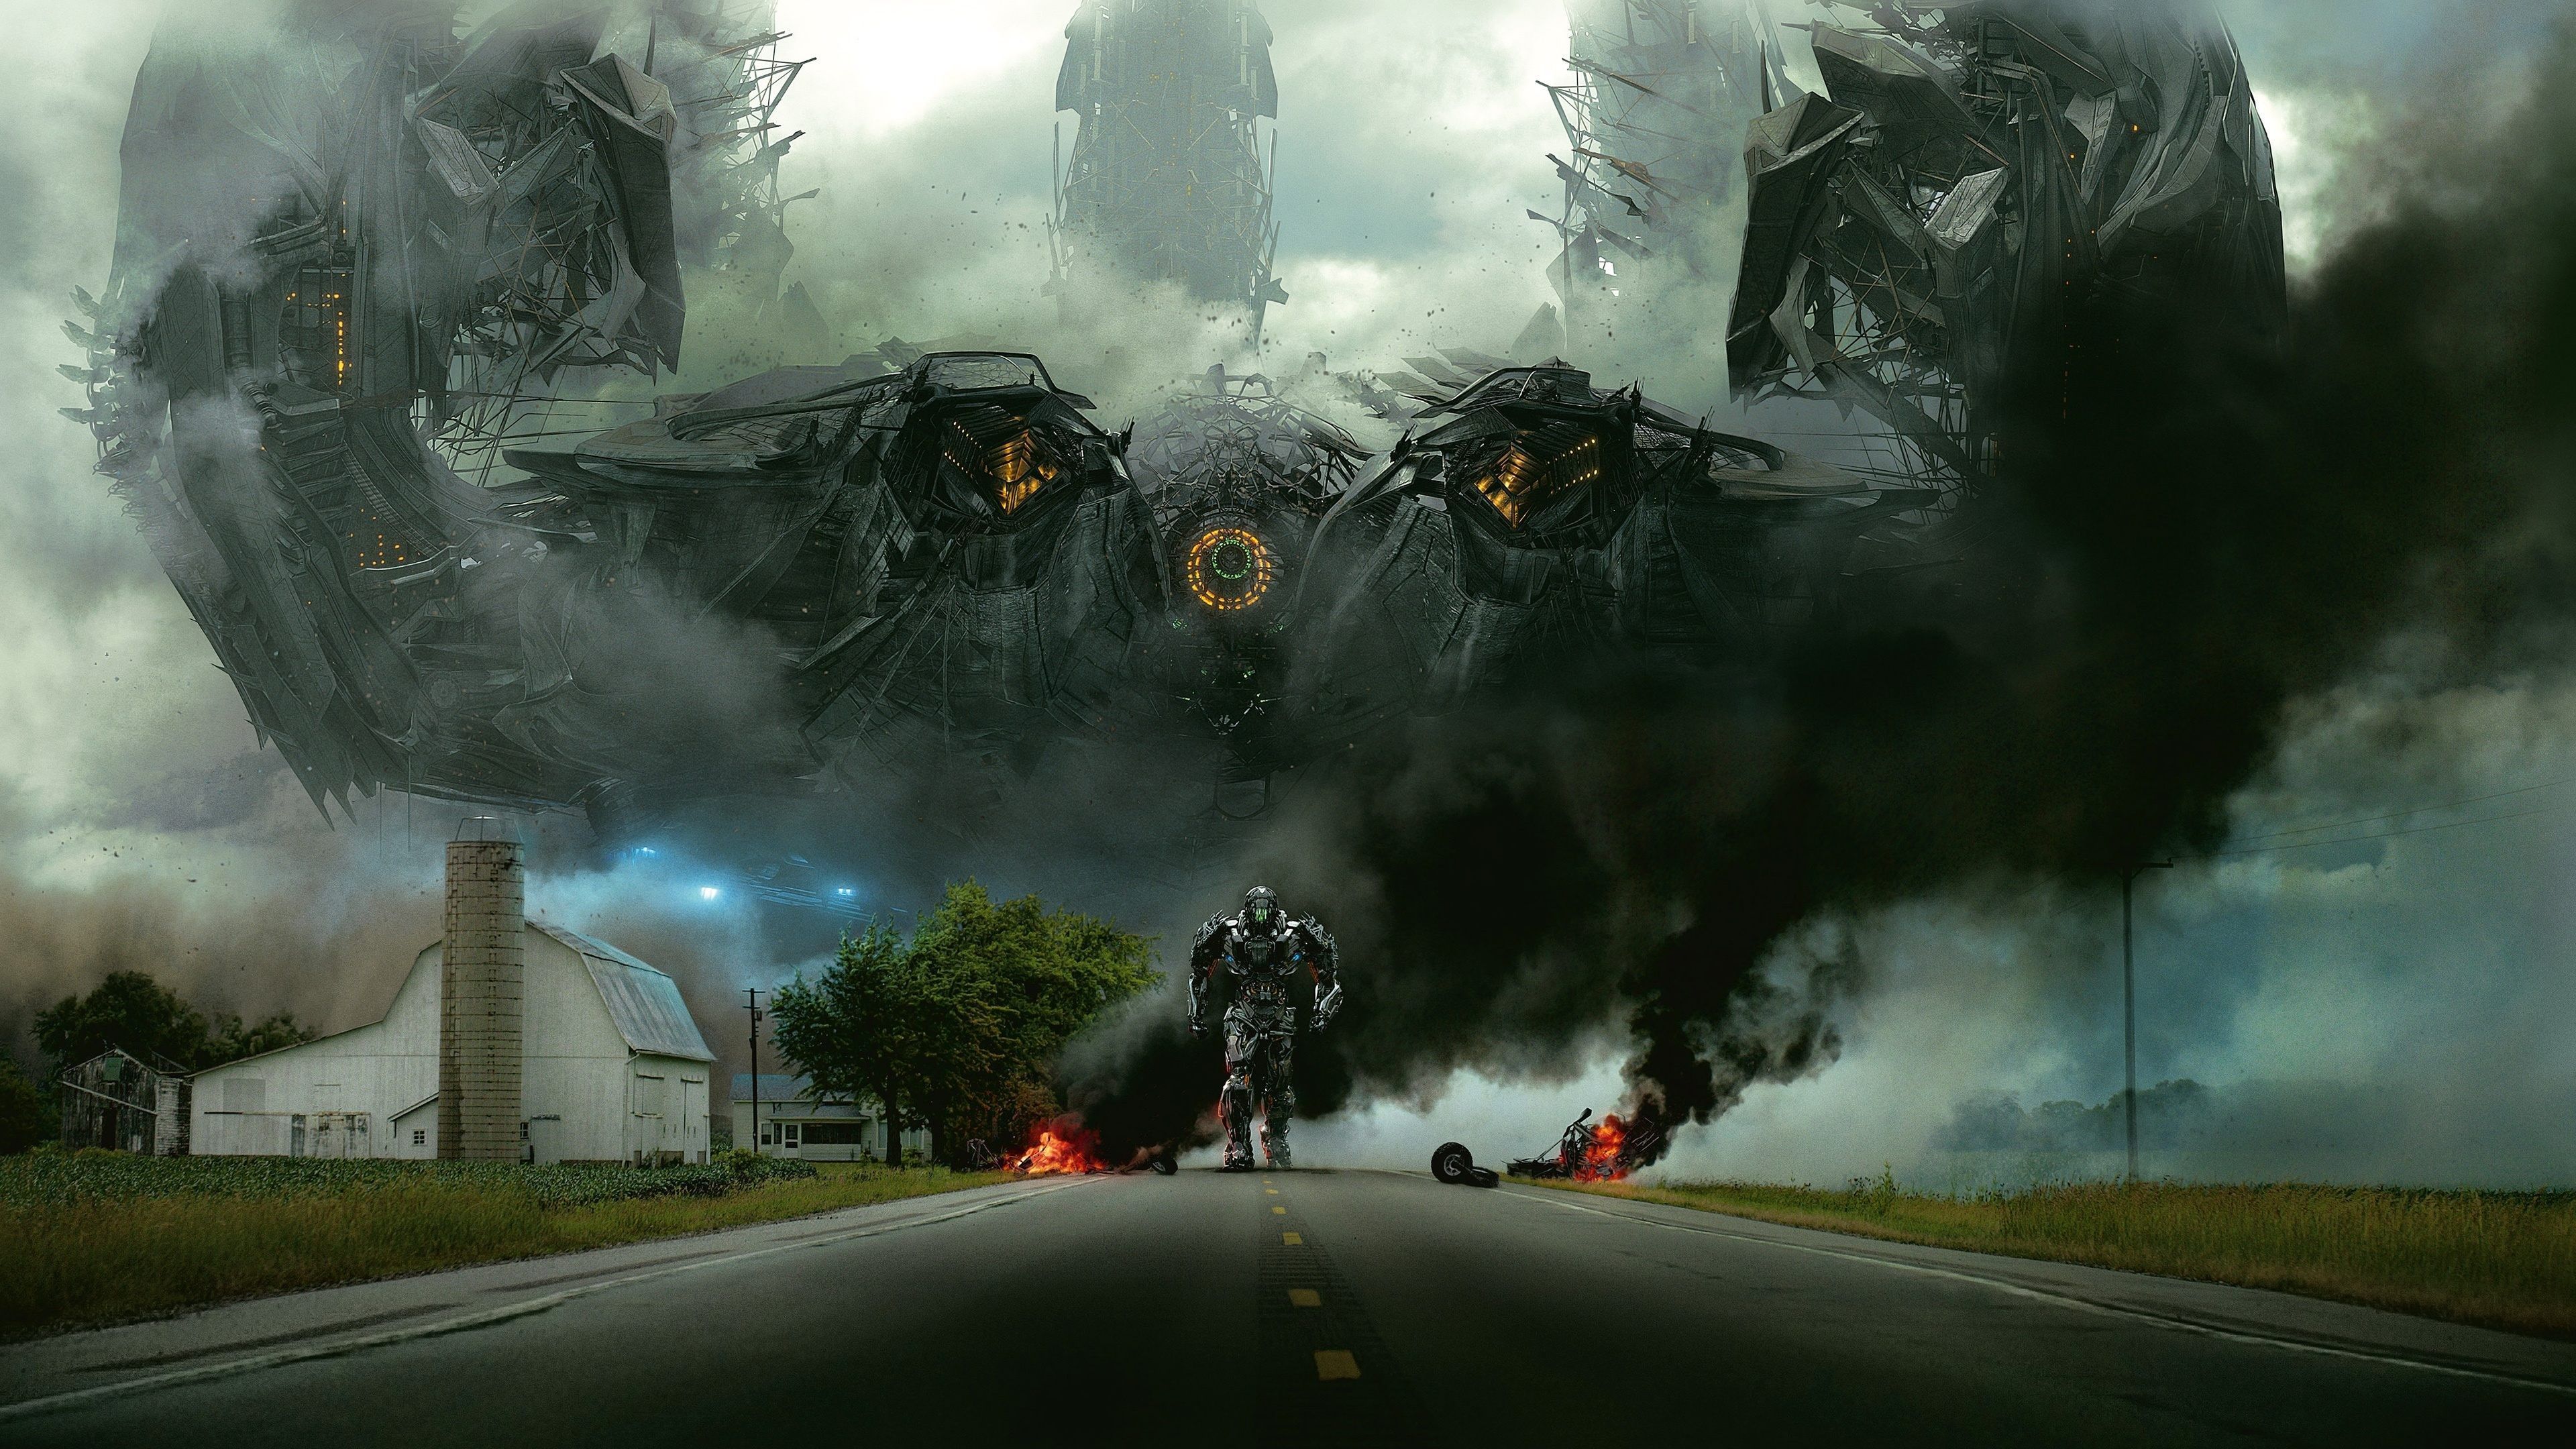 transformers hd images